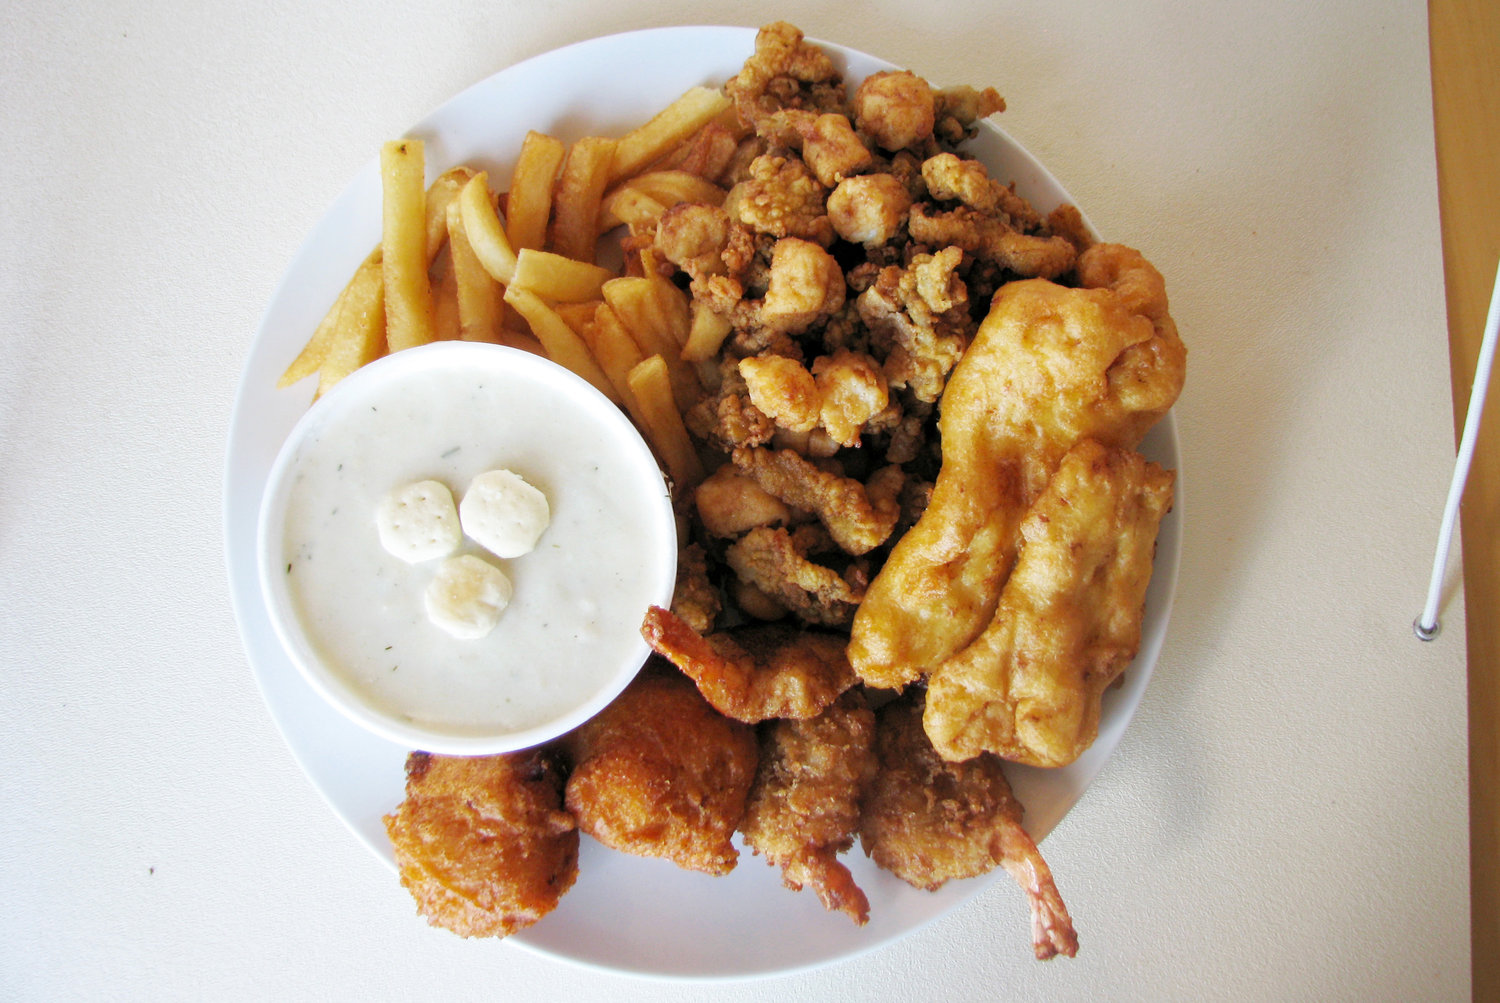 A platter of fried favorites from Iggy’s